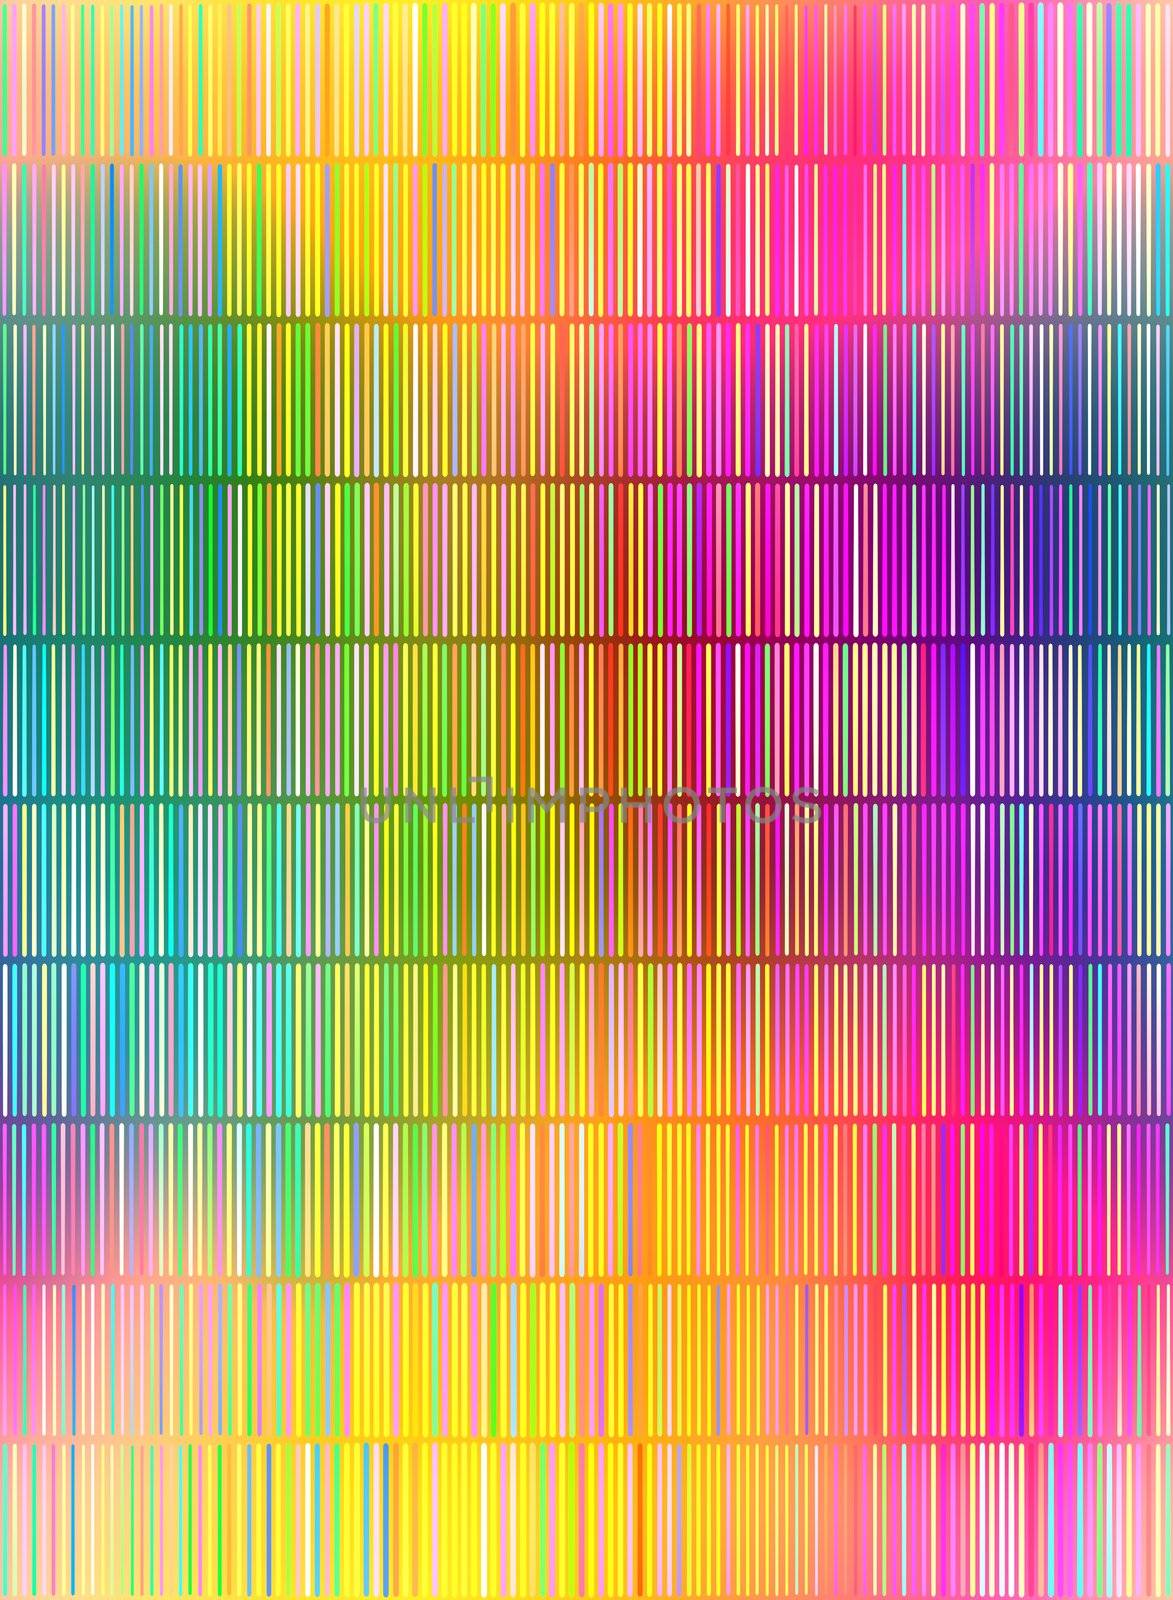 colored lines pattern by weknow